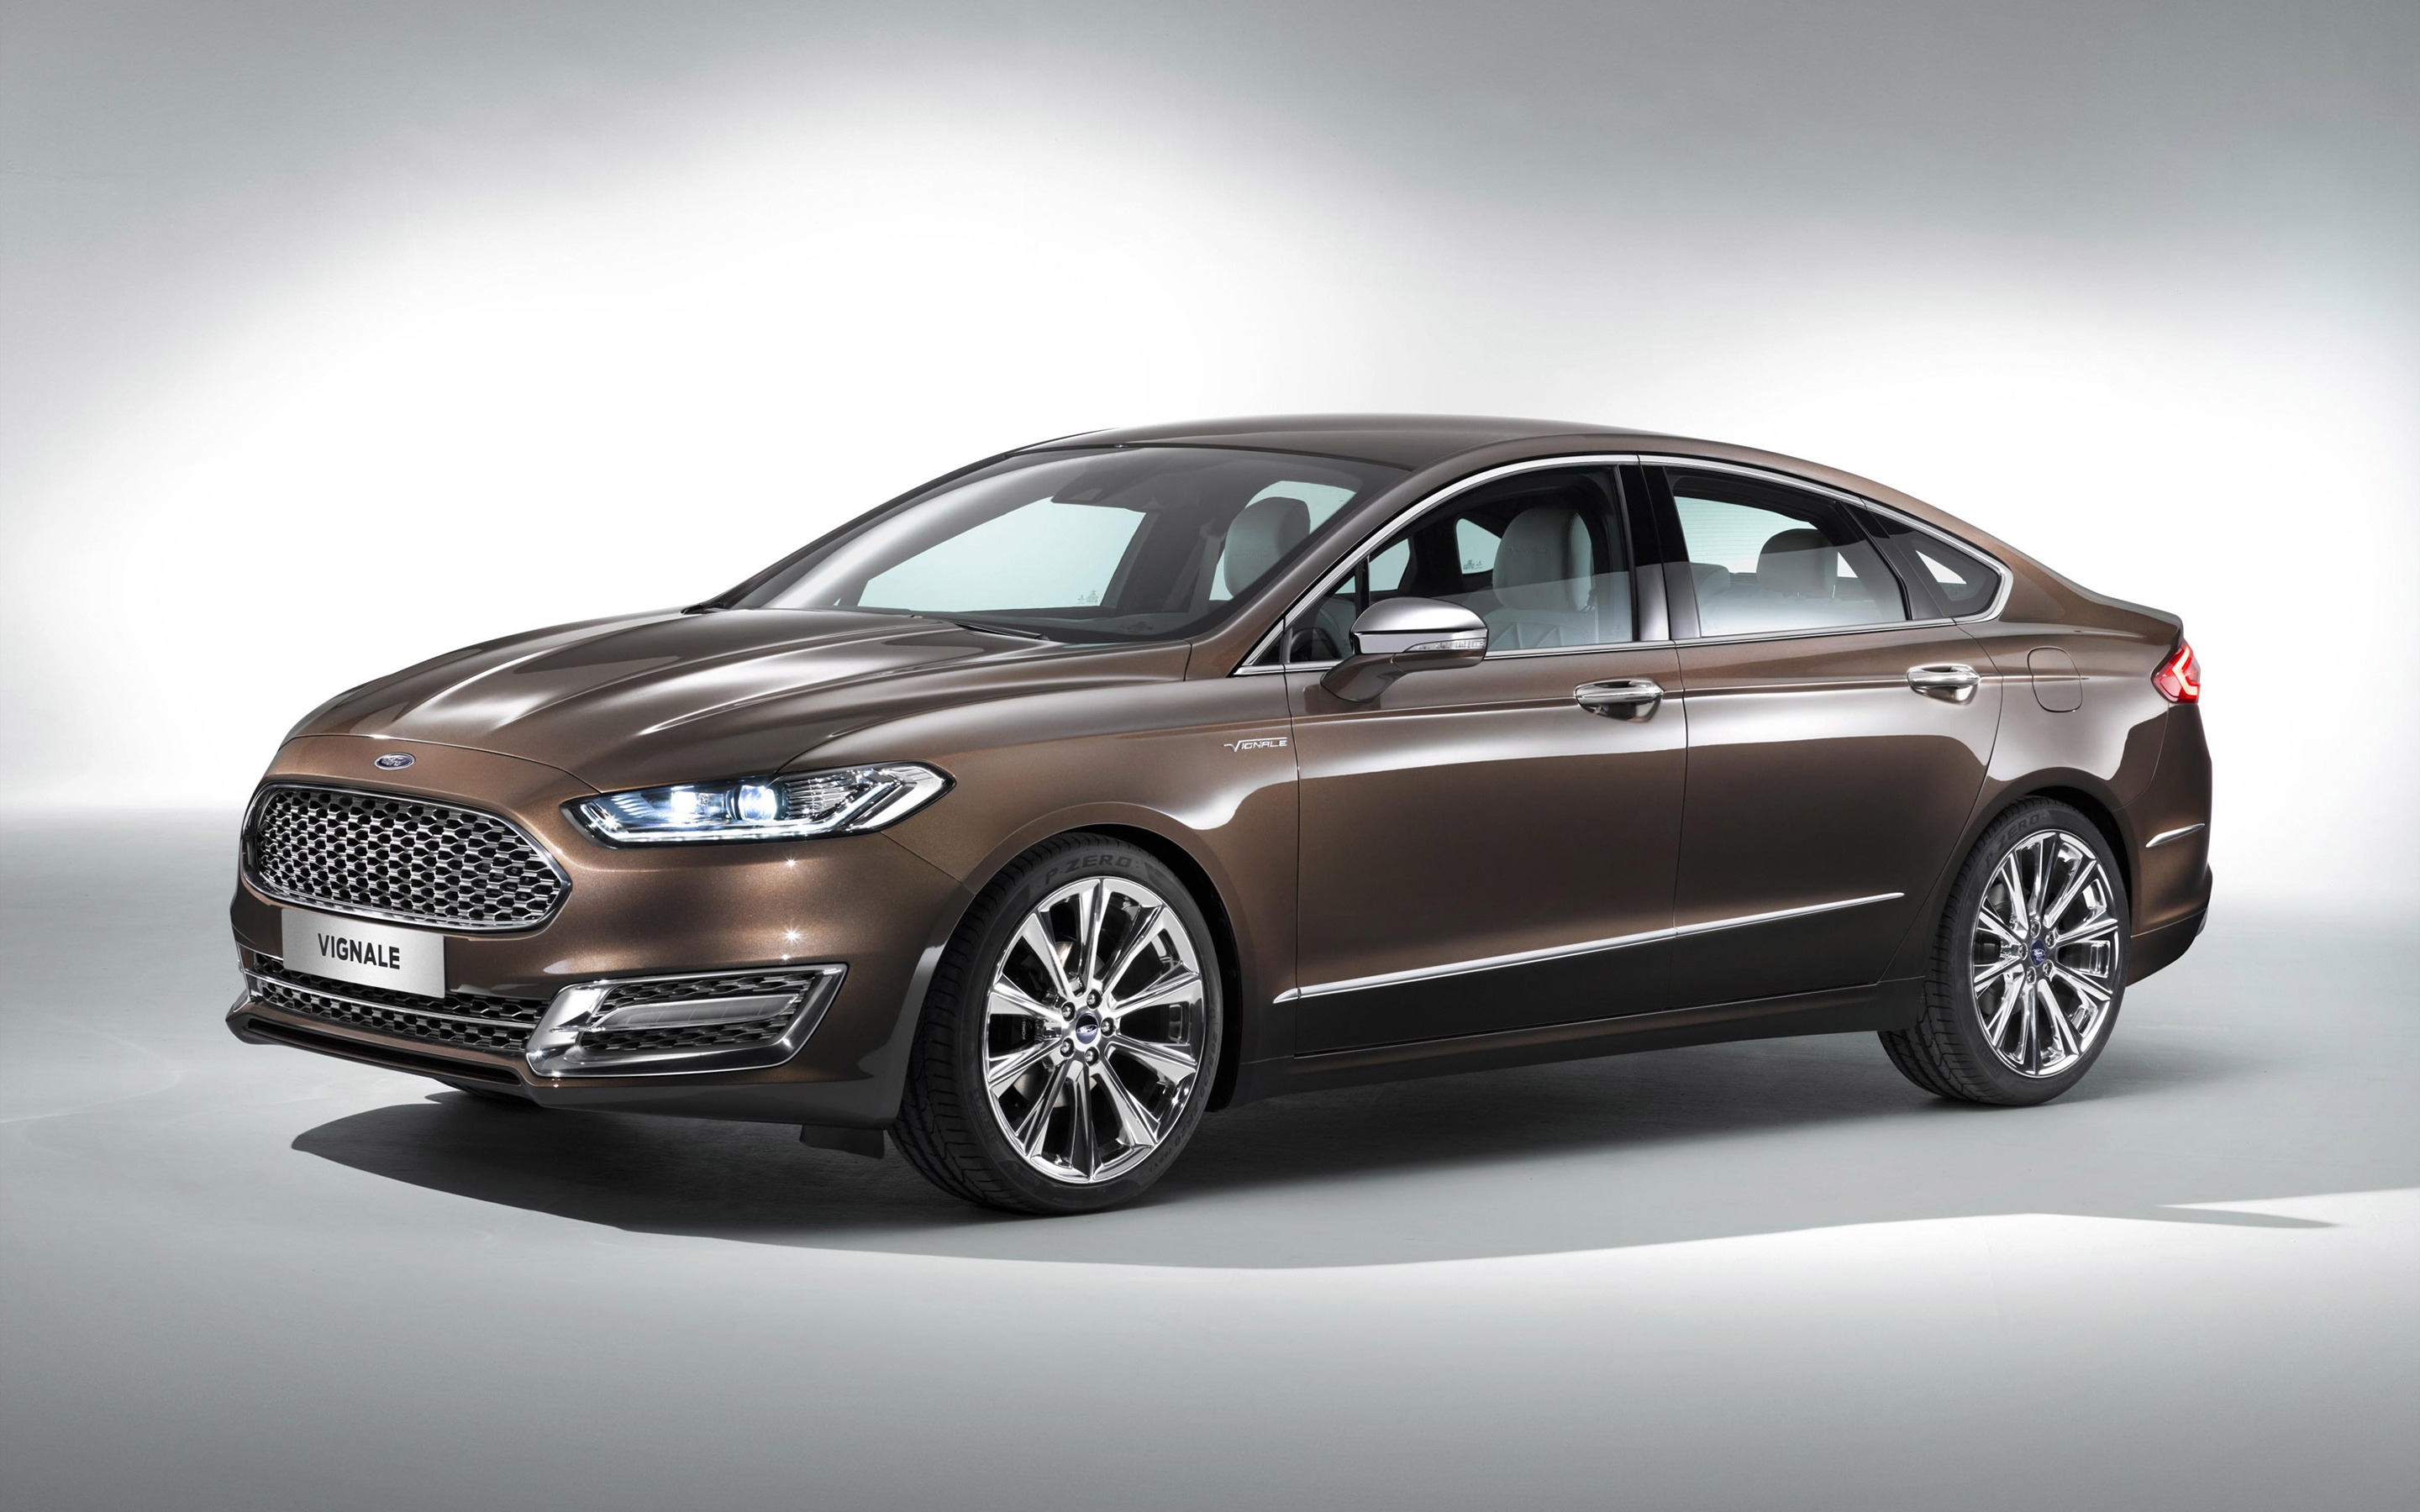 Ford Mondeo Vignale Concept for 2880 x 1800 Retina Display resolution